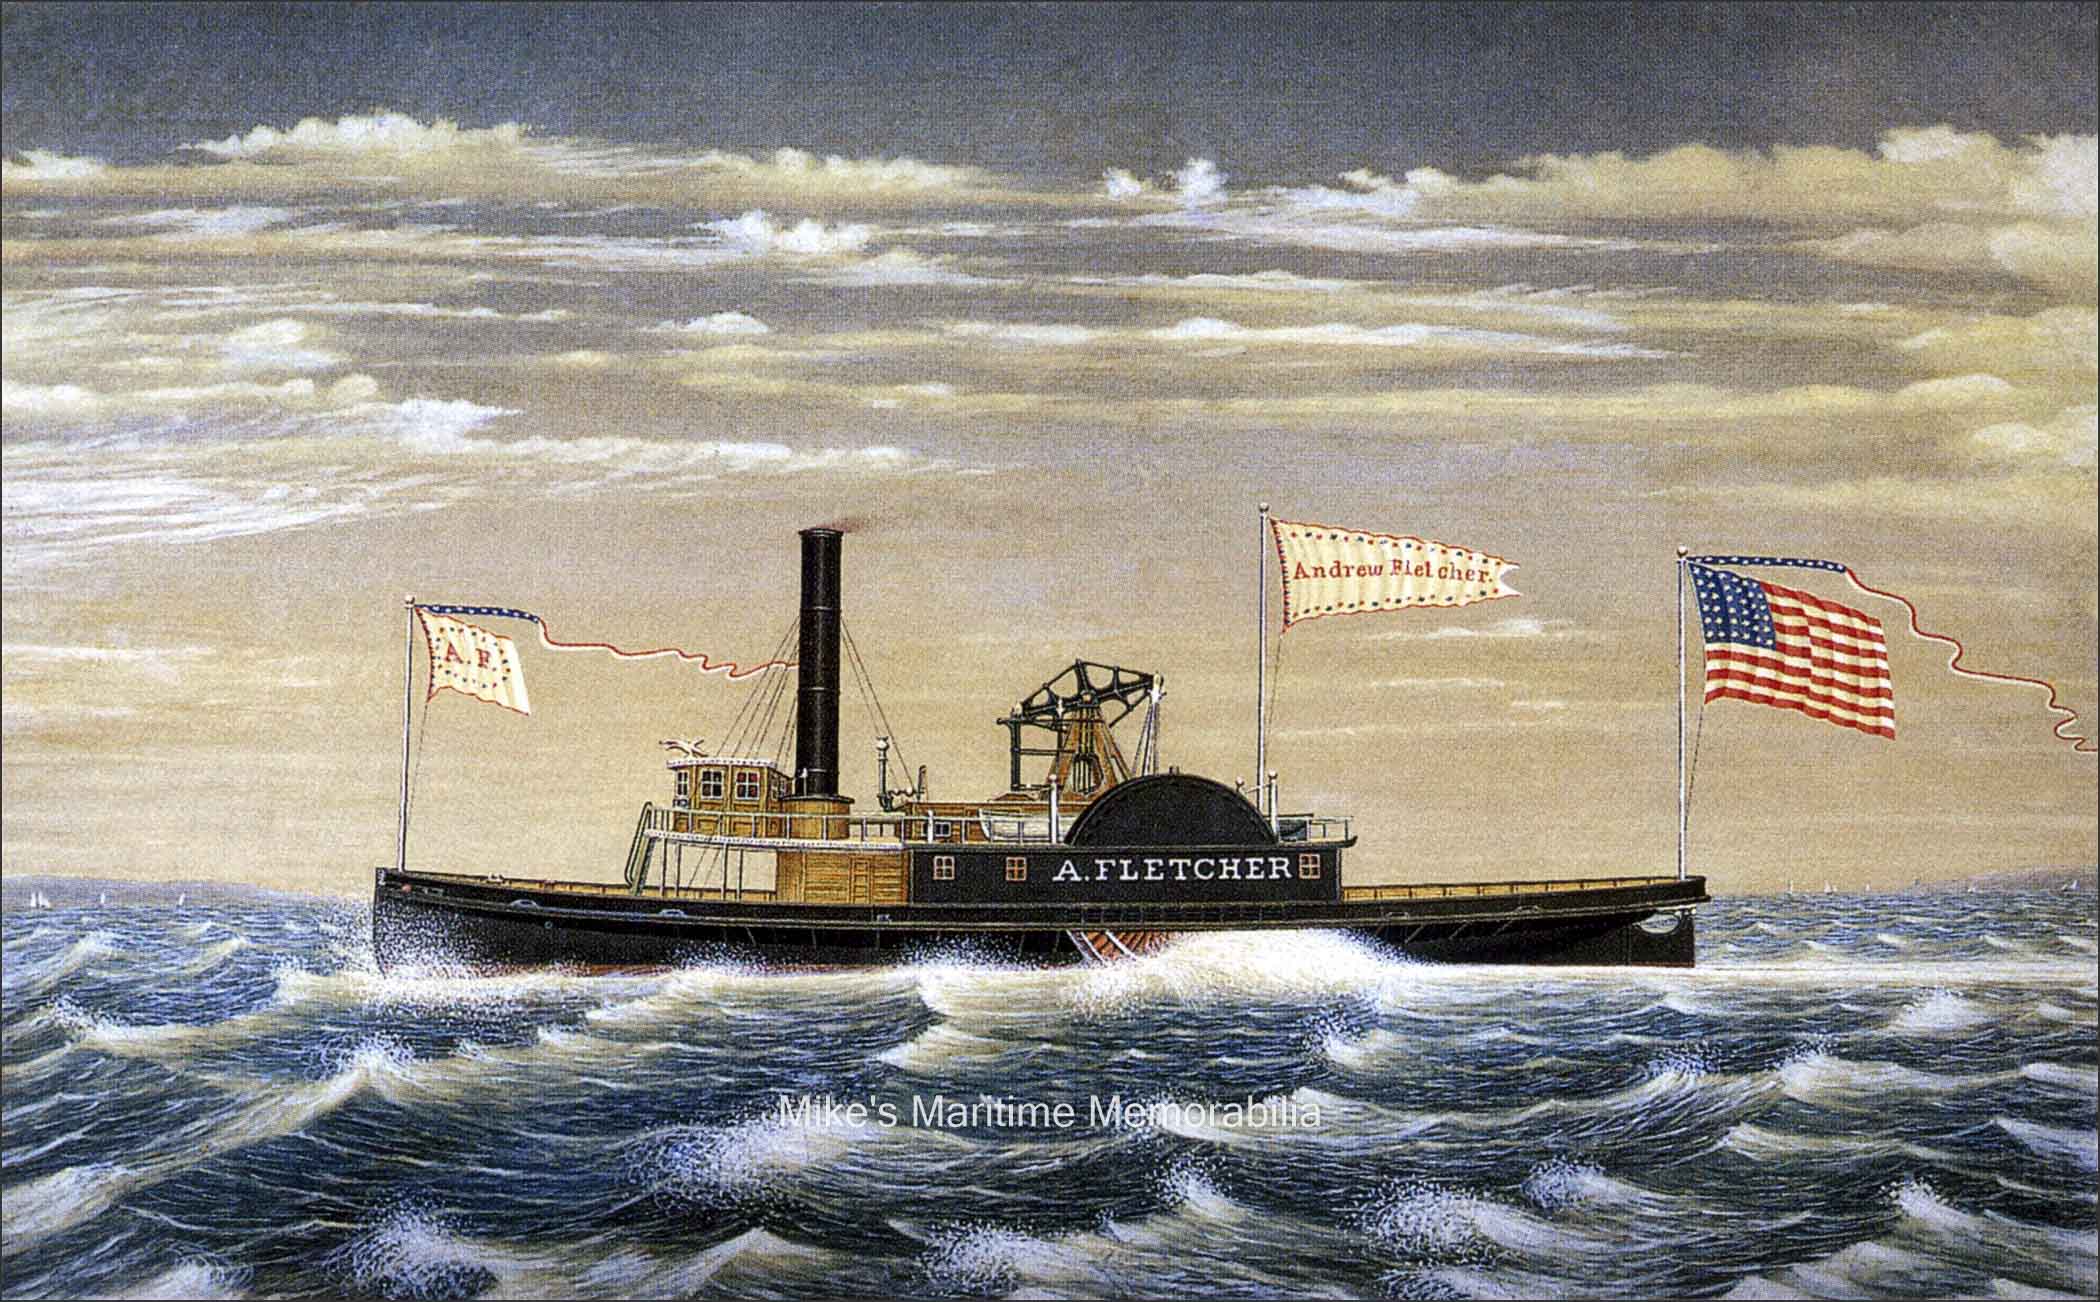 ANDREW FLETCHER, New York, NY – 1865 This 1865 painting of the "ANDREW FLETCHER" by James Bard is a good representation of the earliest towboats (now called tugboats) to operate on a part time basis from New York Harbor as what would later become known as the 'party boat' or 'head boat'. On Sundays during the 1860s and 1870s, there was very little towing business available and many New York harbor towboats took parties of anglers to "The Fishing Banks" during their off days. And during the summer months, it was common to see as many as 30 towboats anchored on the fishing grounds east of Sandy Hook, New Jersey. At the time, she sailed from Manhattan's East River under the guidance of veteran fishing pilot Samuel 'Sam' Greenwood. An advertisement for her dated June 29, 1865 announced "The New and Splendid Steamer ANDREW FLETCHER for the Fishing Banks". The 130 foot long, wood hulled "ANDREW FLETCHER" was built in 1864 by Morton & Edmonds at Athens, New York for the Fletcher Harrison & Co. who at the time manufactured marine steam engines. She was powered with a Fletcher Harrison & Co. coal-fired vertical walking beam steam engine and was named after Company Chairman, Andrew Fletcher. The engine had a single cylinder 36 inches diameter with an 8 foot stroke while the boiler was a lobster return flue type with a shell diameter of 7 feet 4 inches, a width at front of 9 feet, and a whole length 27 feet. The "ANDREW FLETCHER" had a top speed of 15 knots. The vessel was later owned by the Quarantine Commission of New York and on December 19, 1872, she caught fire while returning from Hoffman Island in Lower New York Bay and burned to the waterline. She was scrapped and her engine was salvaged and in 1873, installed in a newly built vessel, the "NELSON K. HOPKINS".